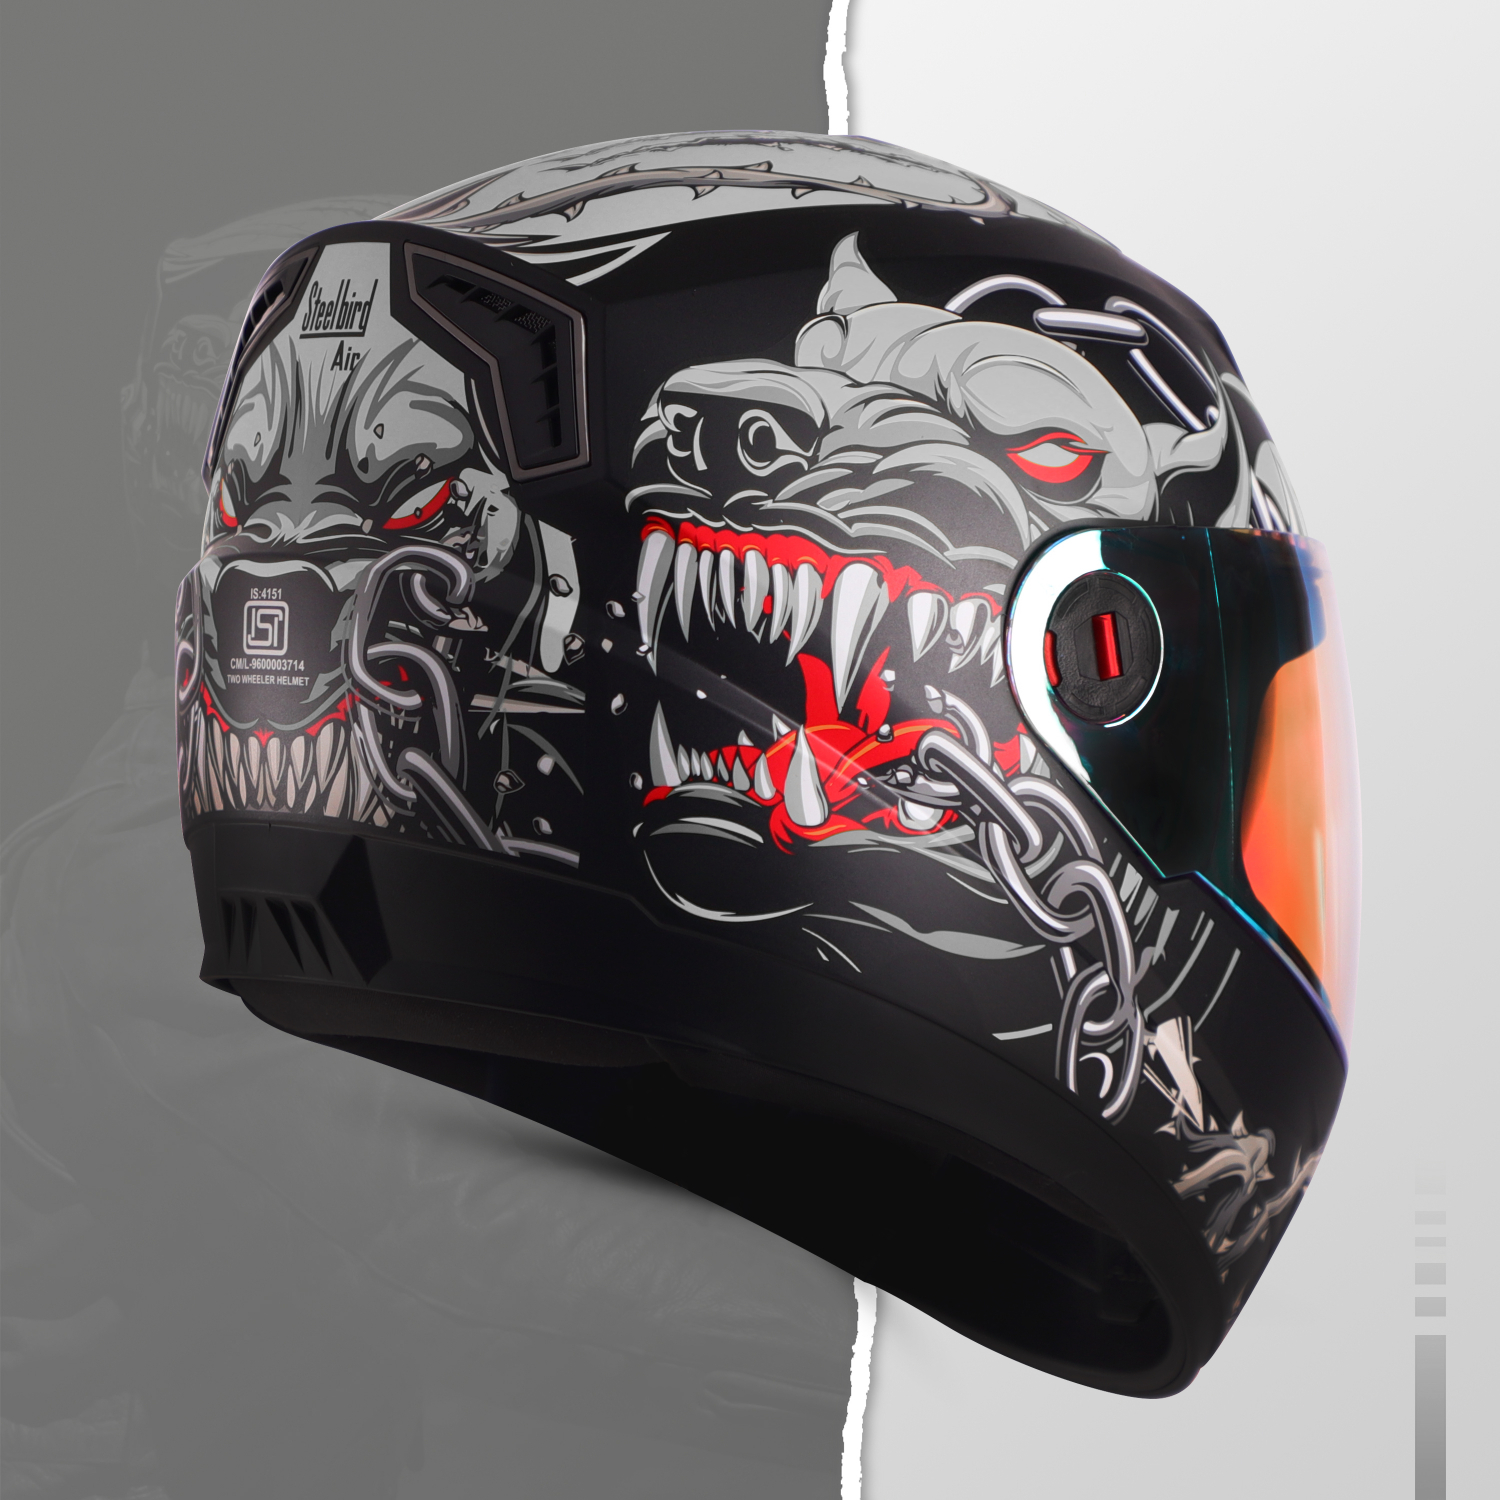 Steelbird SBA-1 Angry Dog ISI Certified Full Face Graphic Helmet For Men And Women With Inner Smoke Sun Shield (Glossy Black Grey With Night Vision Rainbow Visor)